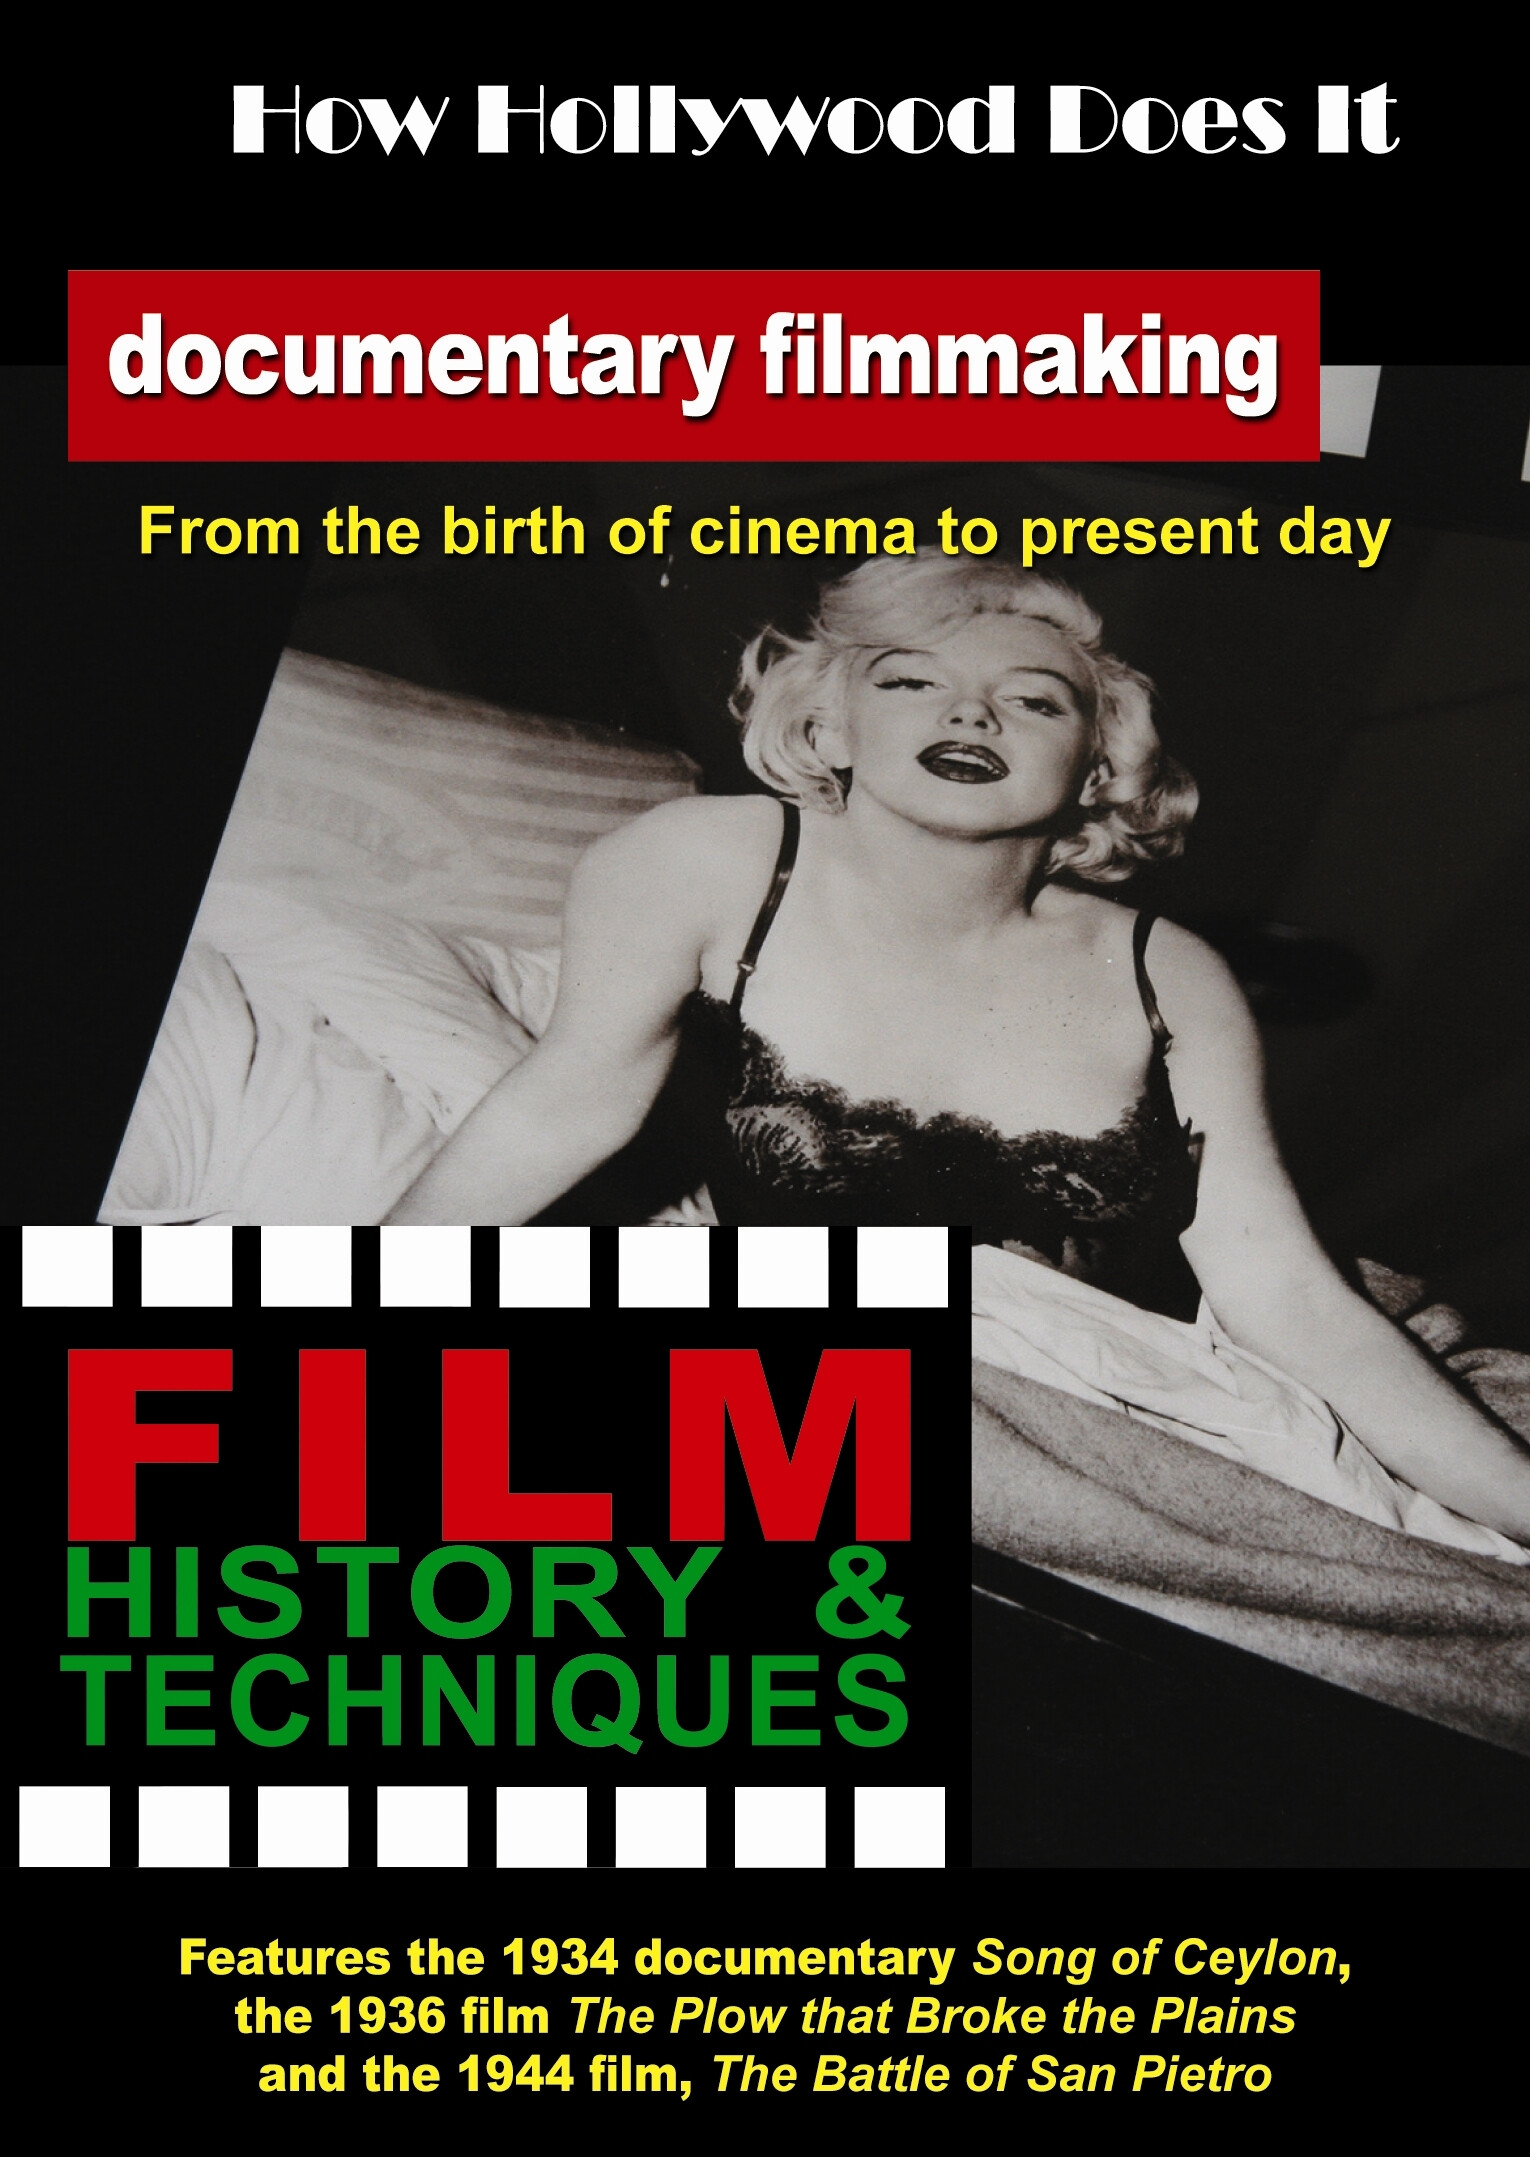 FHHD12 - How Hollywood Does It - The Film History & Techniques 12 Set Collection